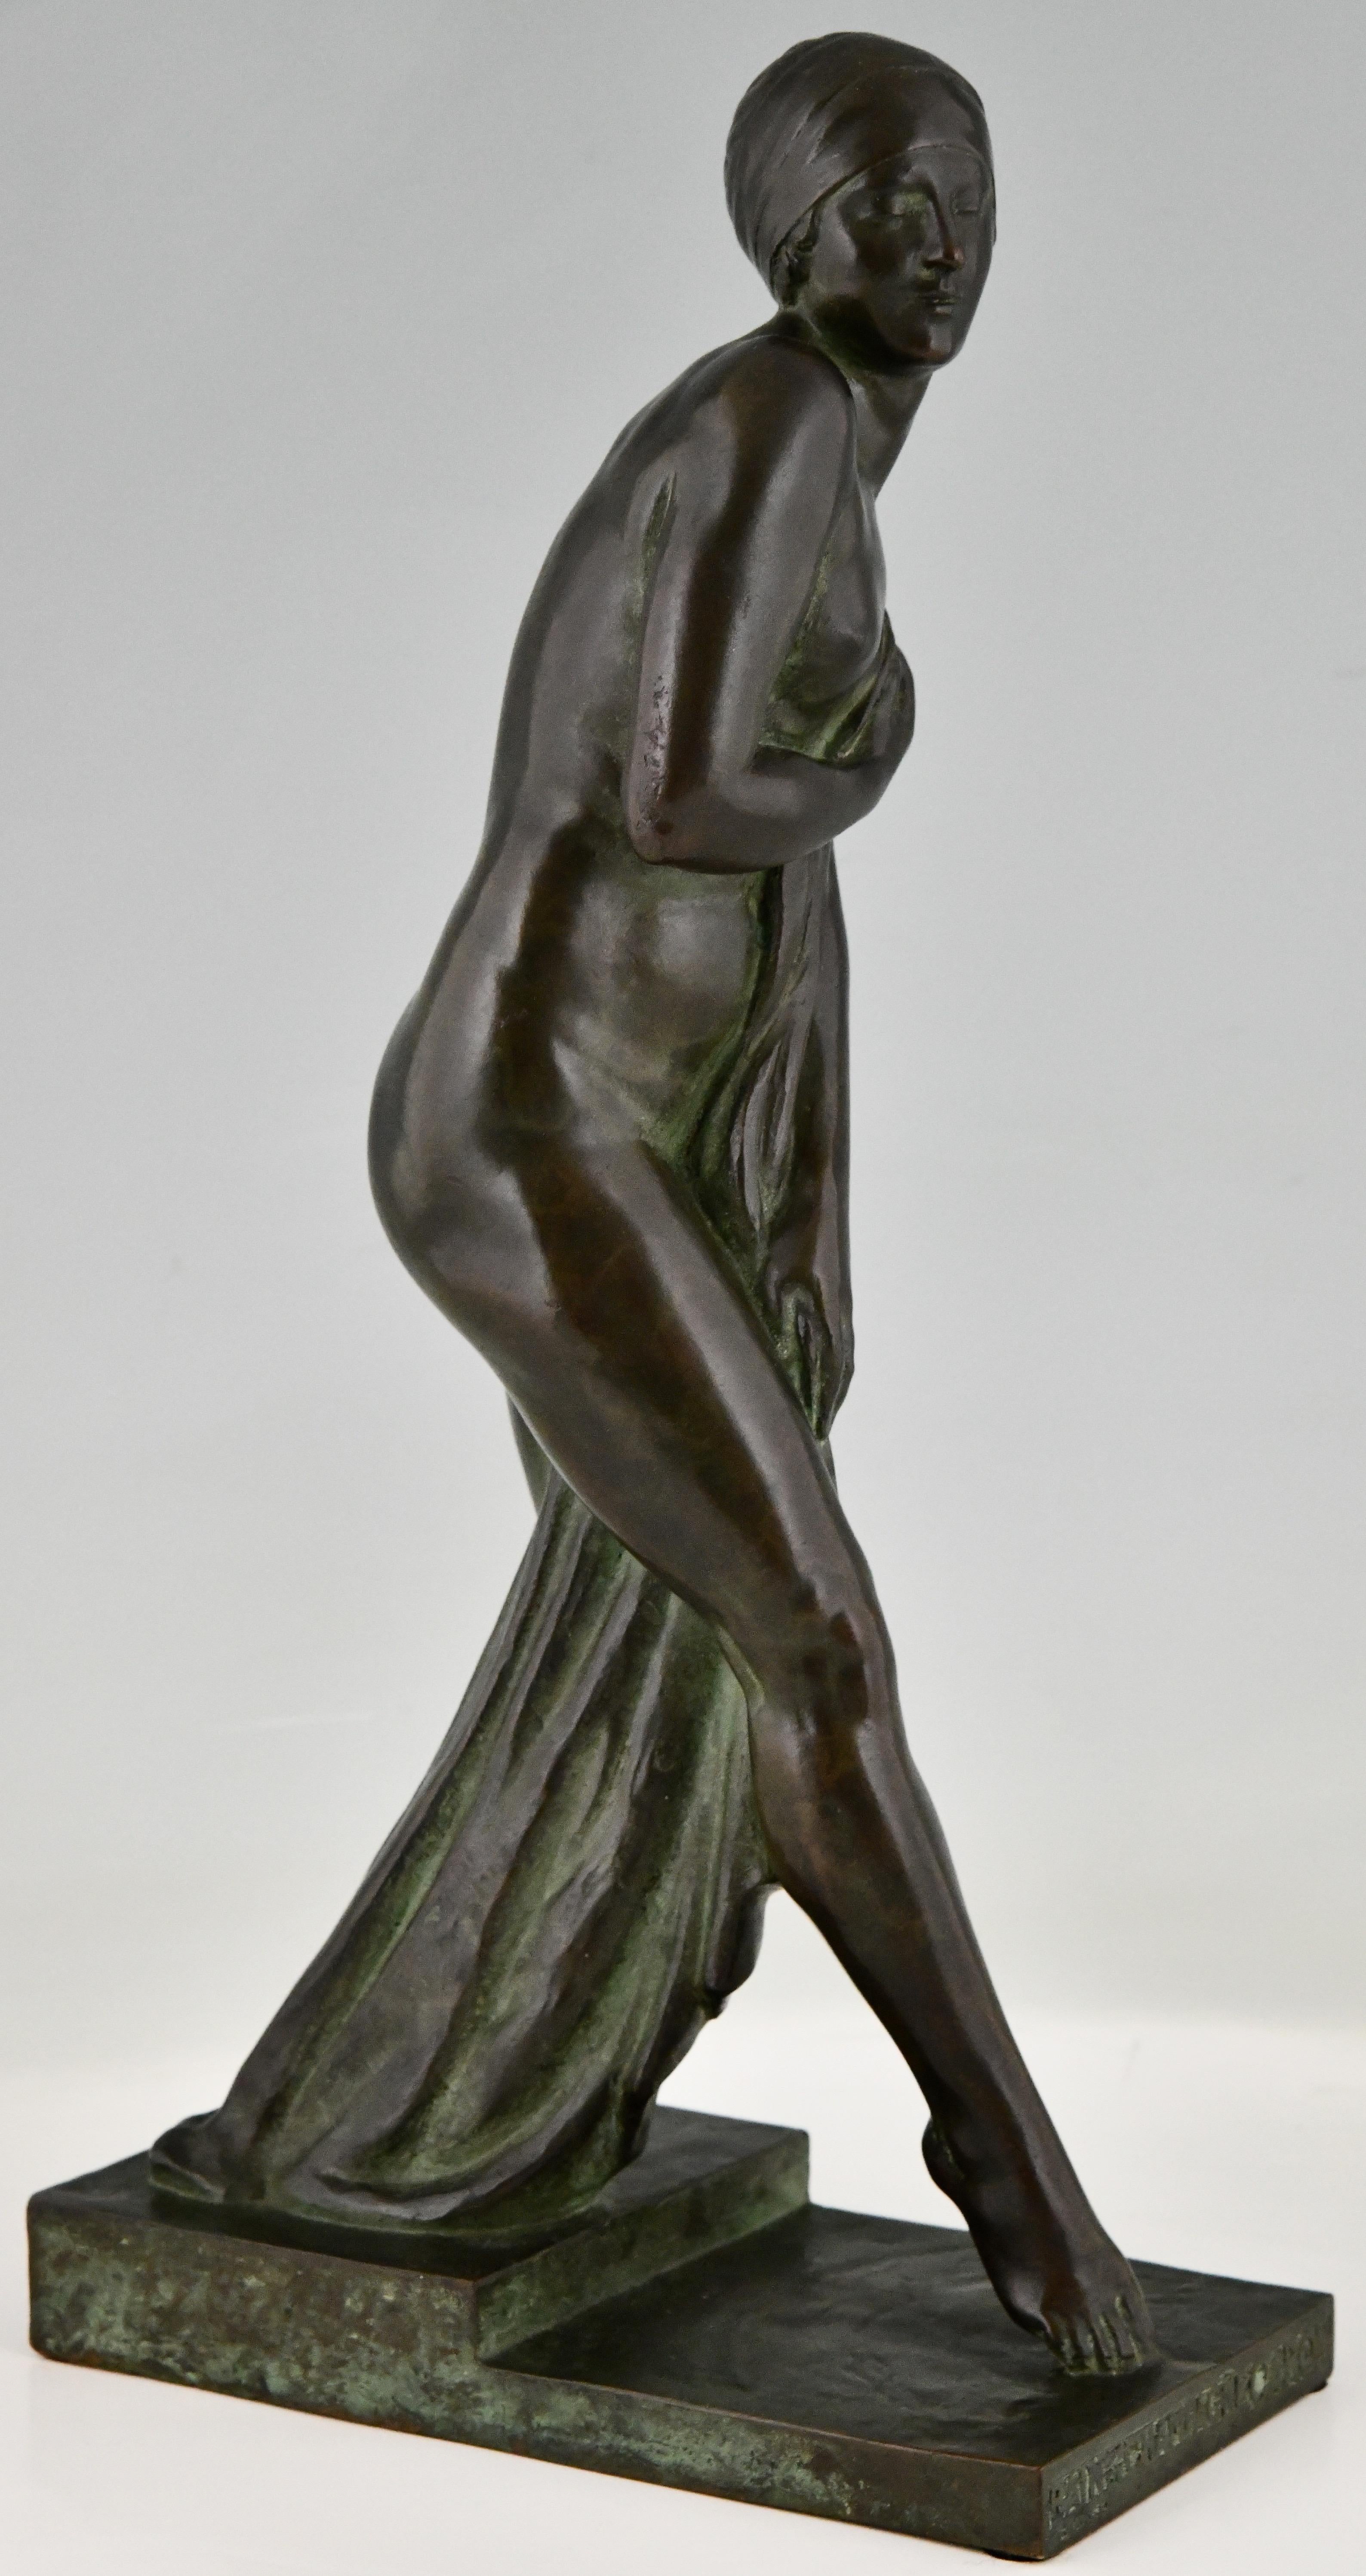 Early 20th Century Art Deco Bronze Sculpture Bathing Nude Bain De Champagne by Georges Chauvel 1926 For Sale